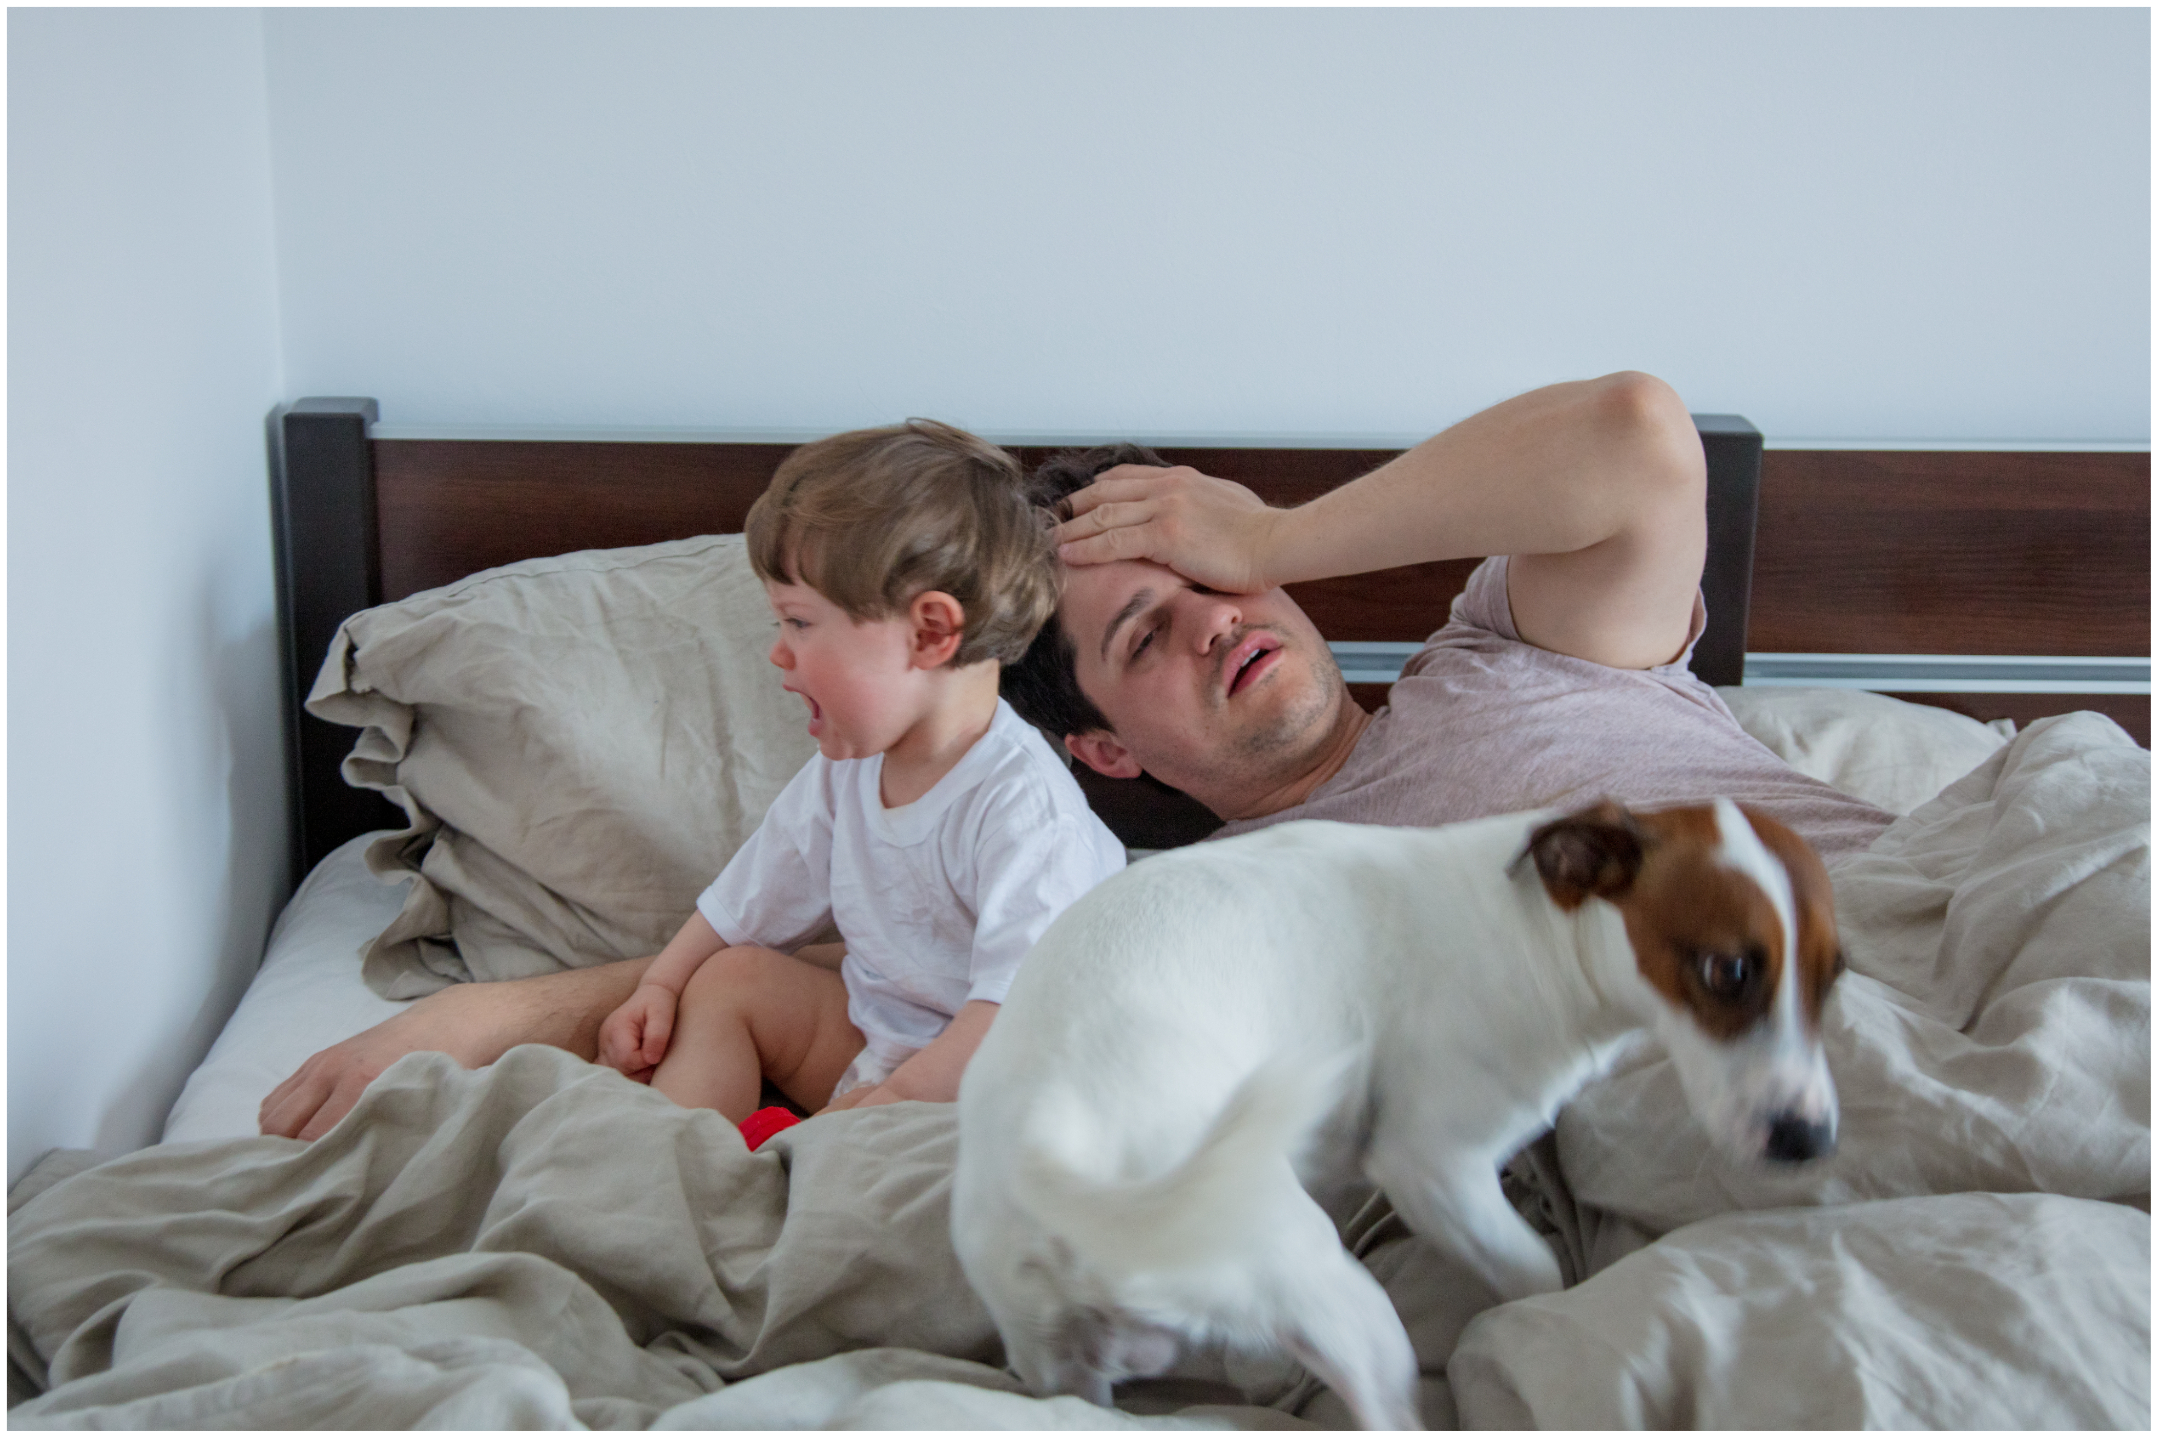 Dad More Worried About Pet Dog Than His Toddler Blasted: 'Didn't Compare